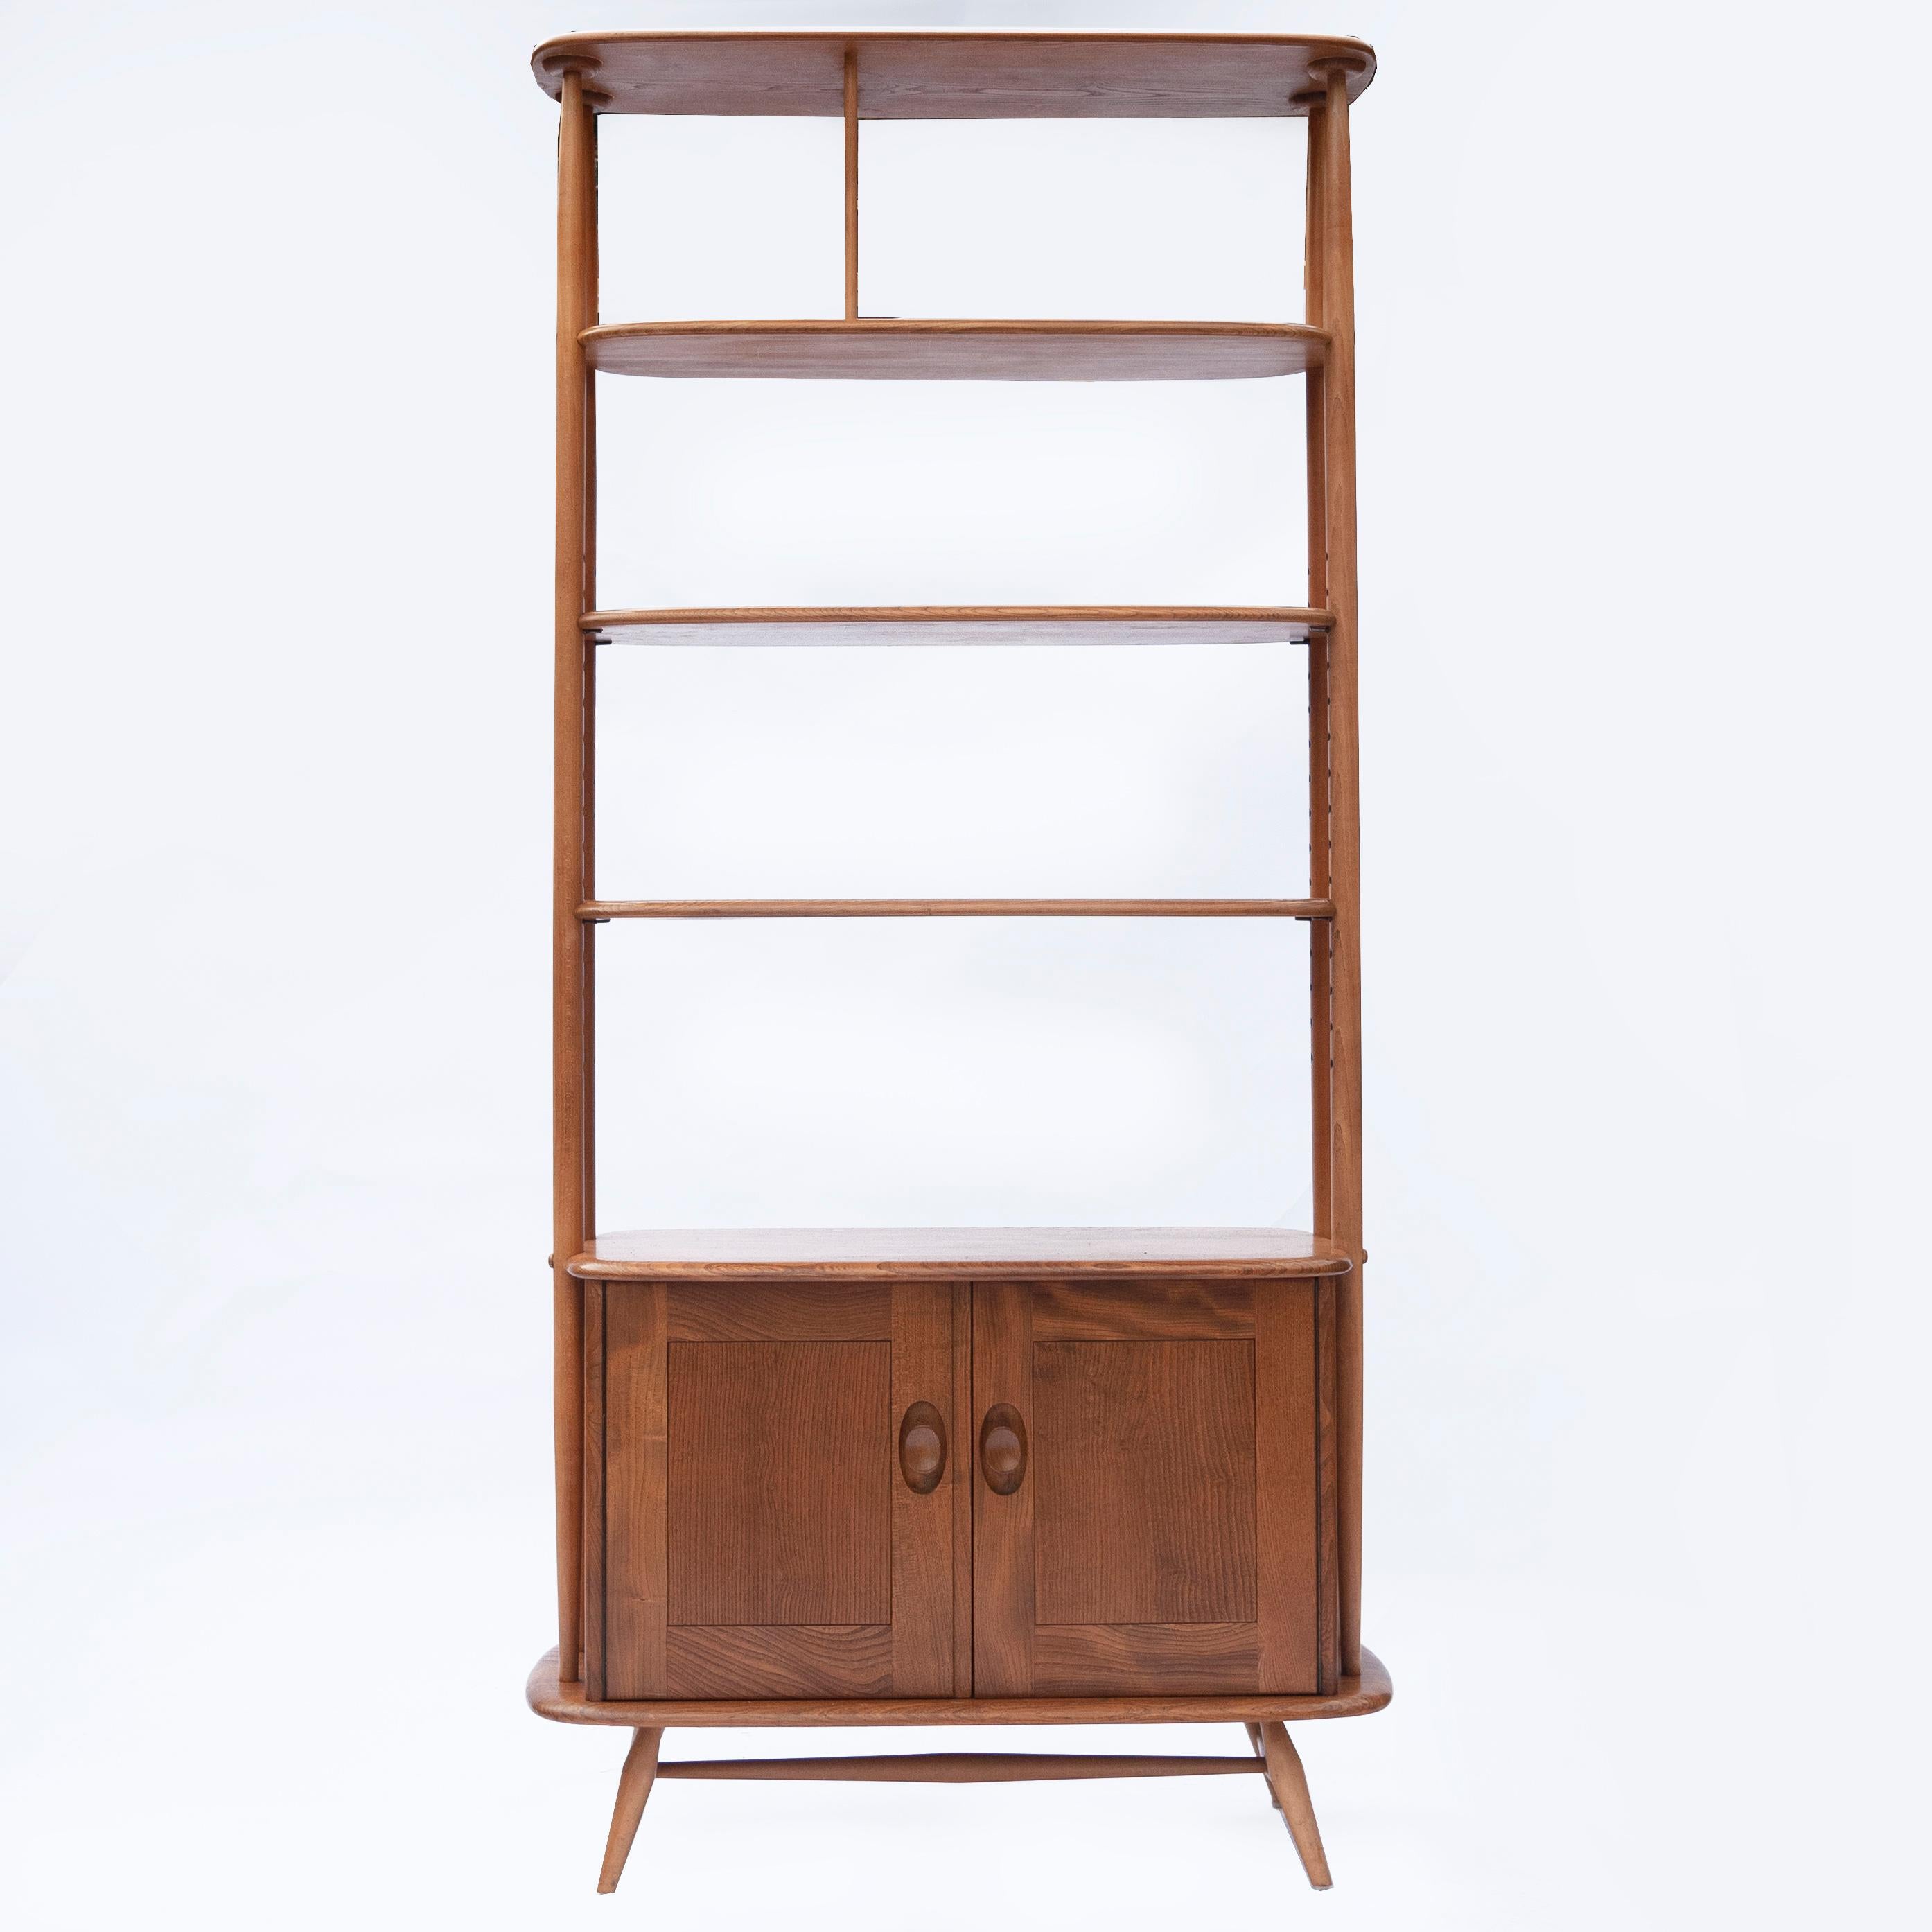 A floor elm wall unit by Ercol. It features a base with two doors with inner shelf.

Manufacturer - Ercol

Design Period - 1960 to 1969

Country of Manufacture - U.K

Style - Mid-CenturyDetailed Condition - Good with minimal